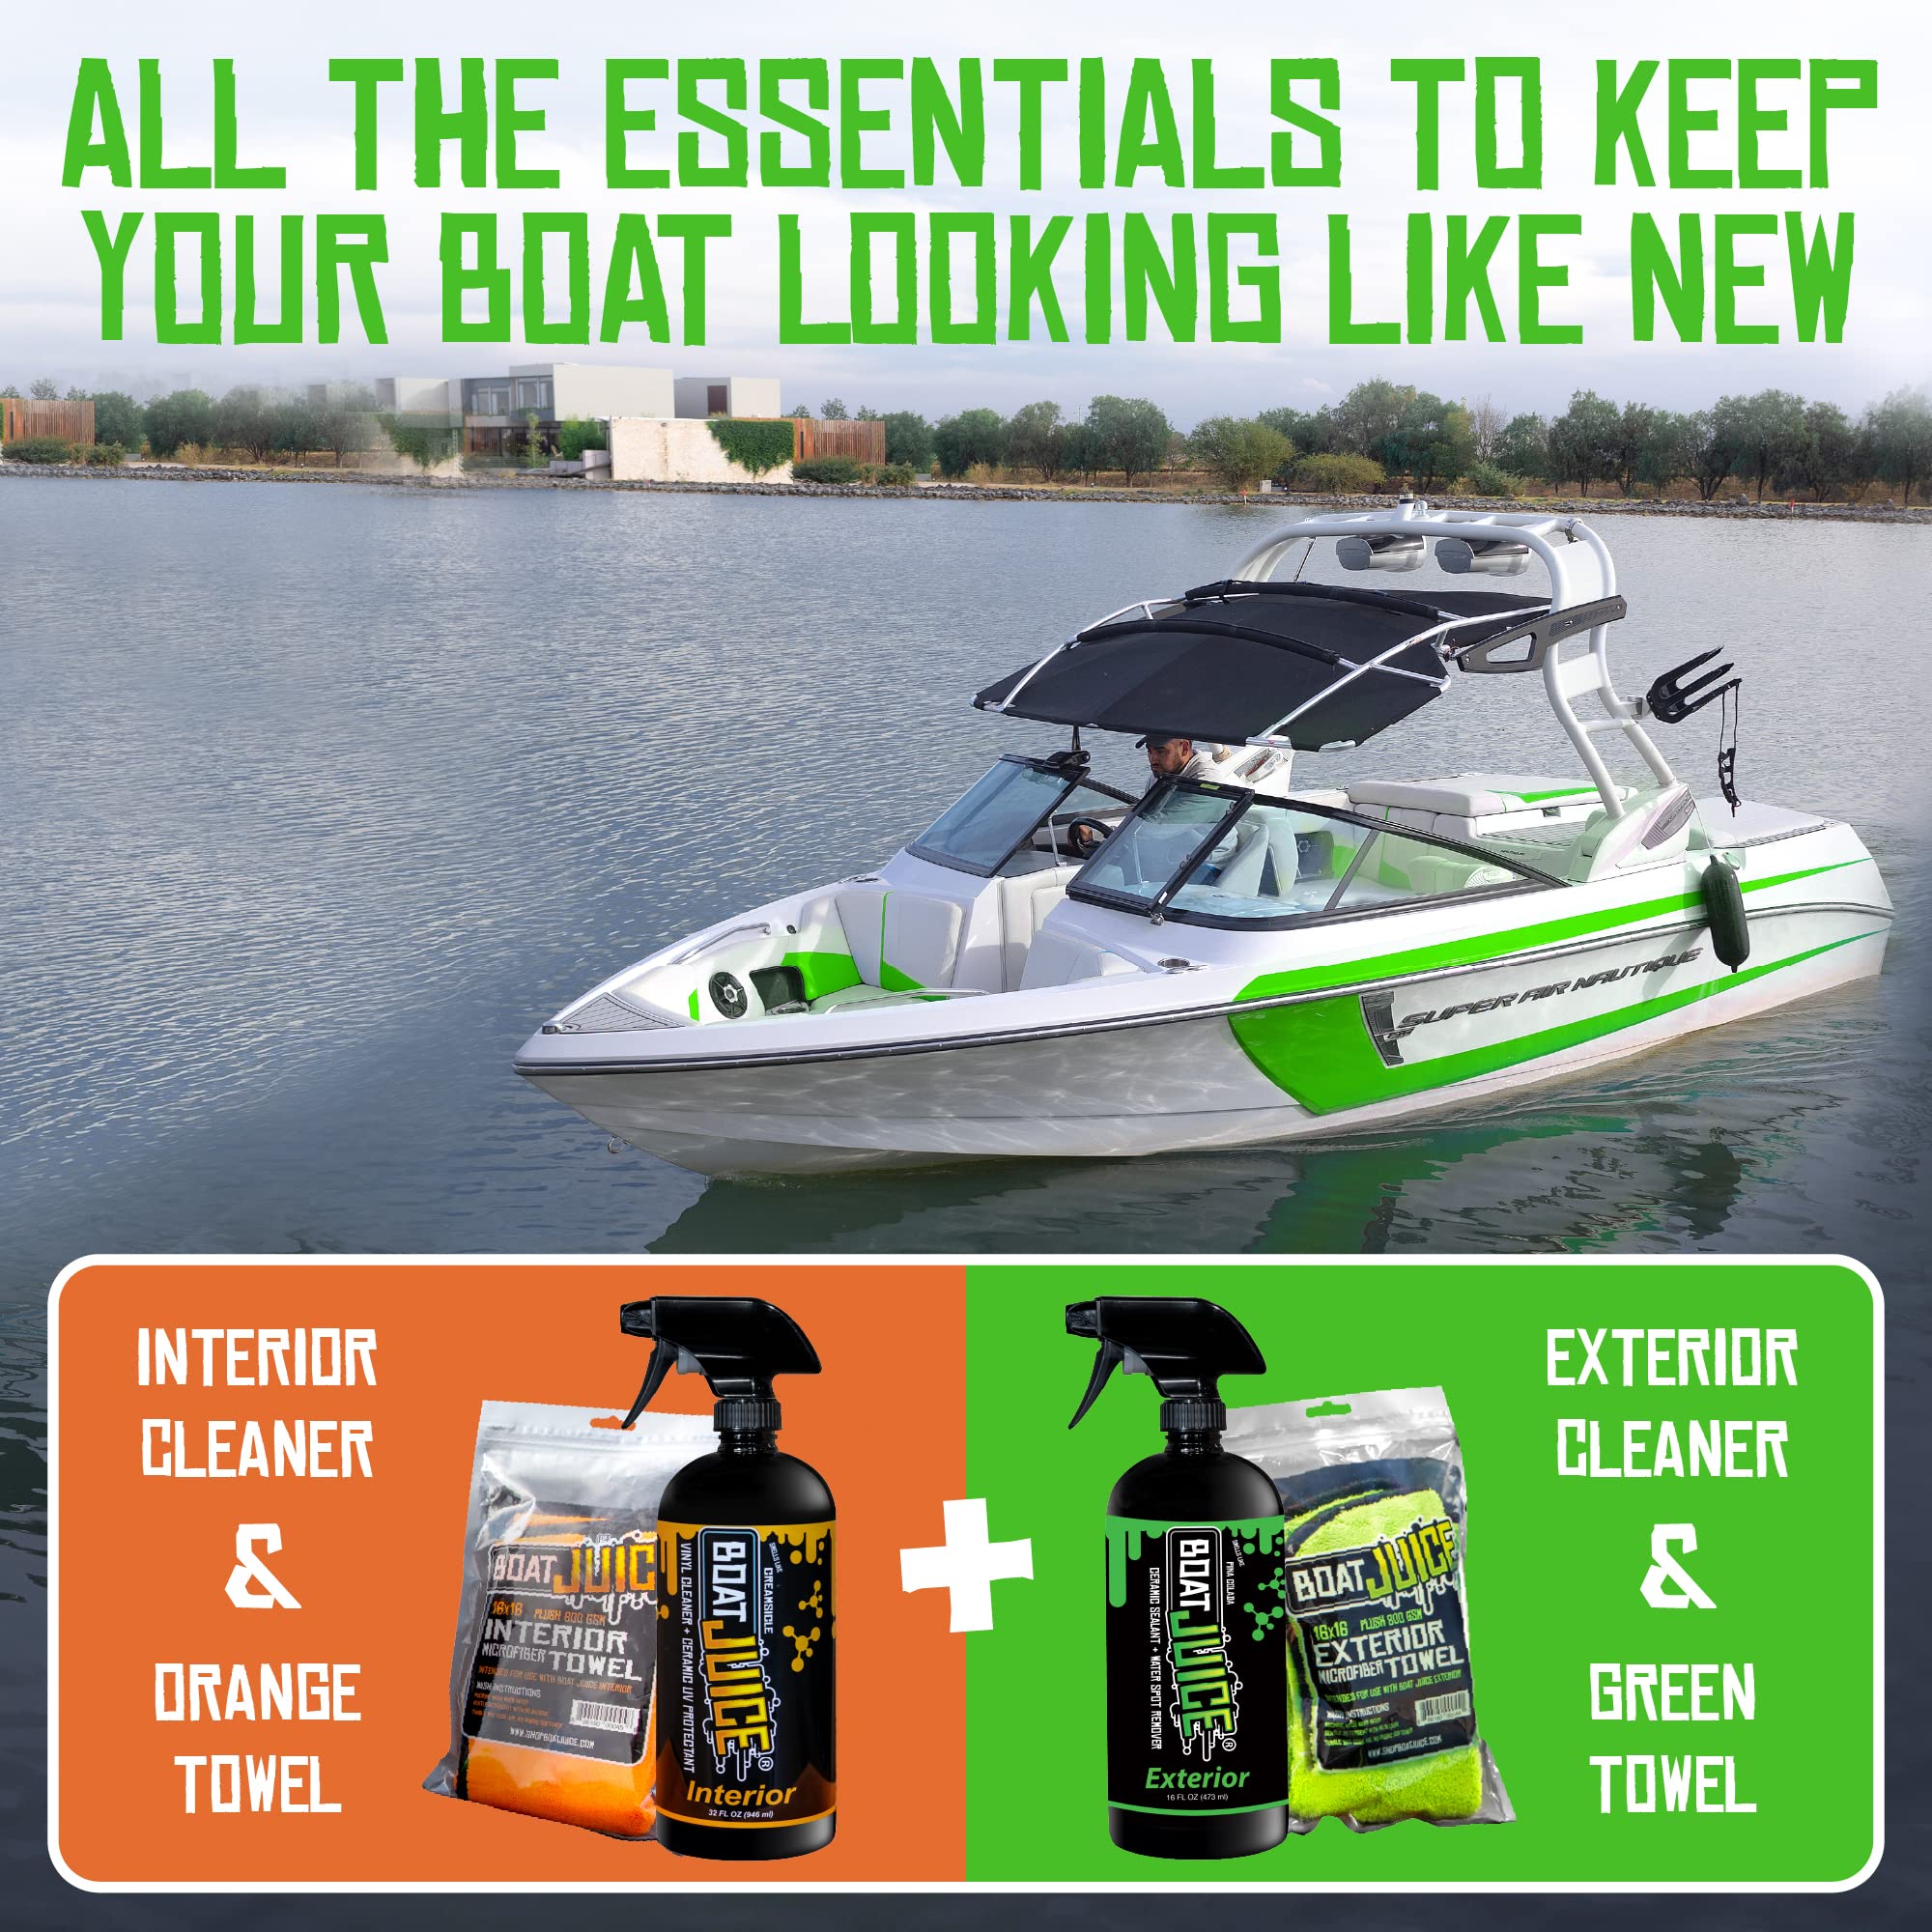 Boat Juice Boat Cleaning Kit - Exterior Boat Cleaner Water Spot Remover, Interior Boat Cleaner for Seats & Vinyl, 2 Microfiber Towels - Boat Cleaning Supplies, Boat Accessories (Kit)